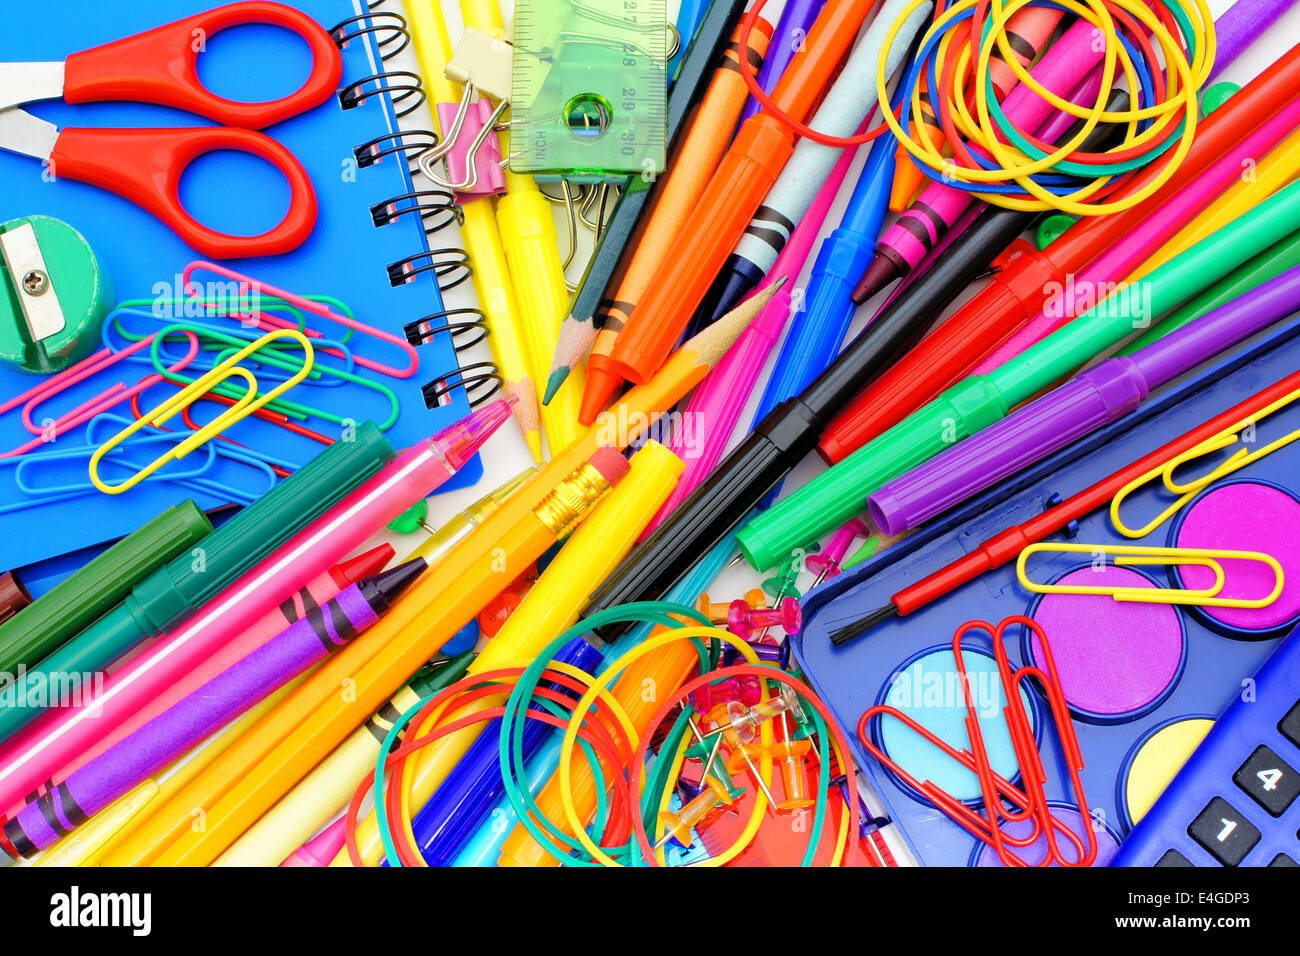 Full background of a colorful assortment of school supplies Stock Photo